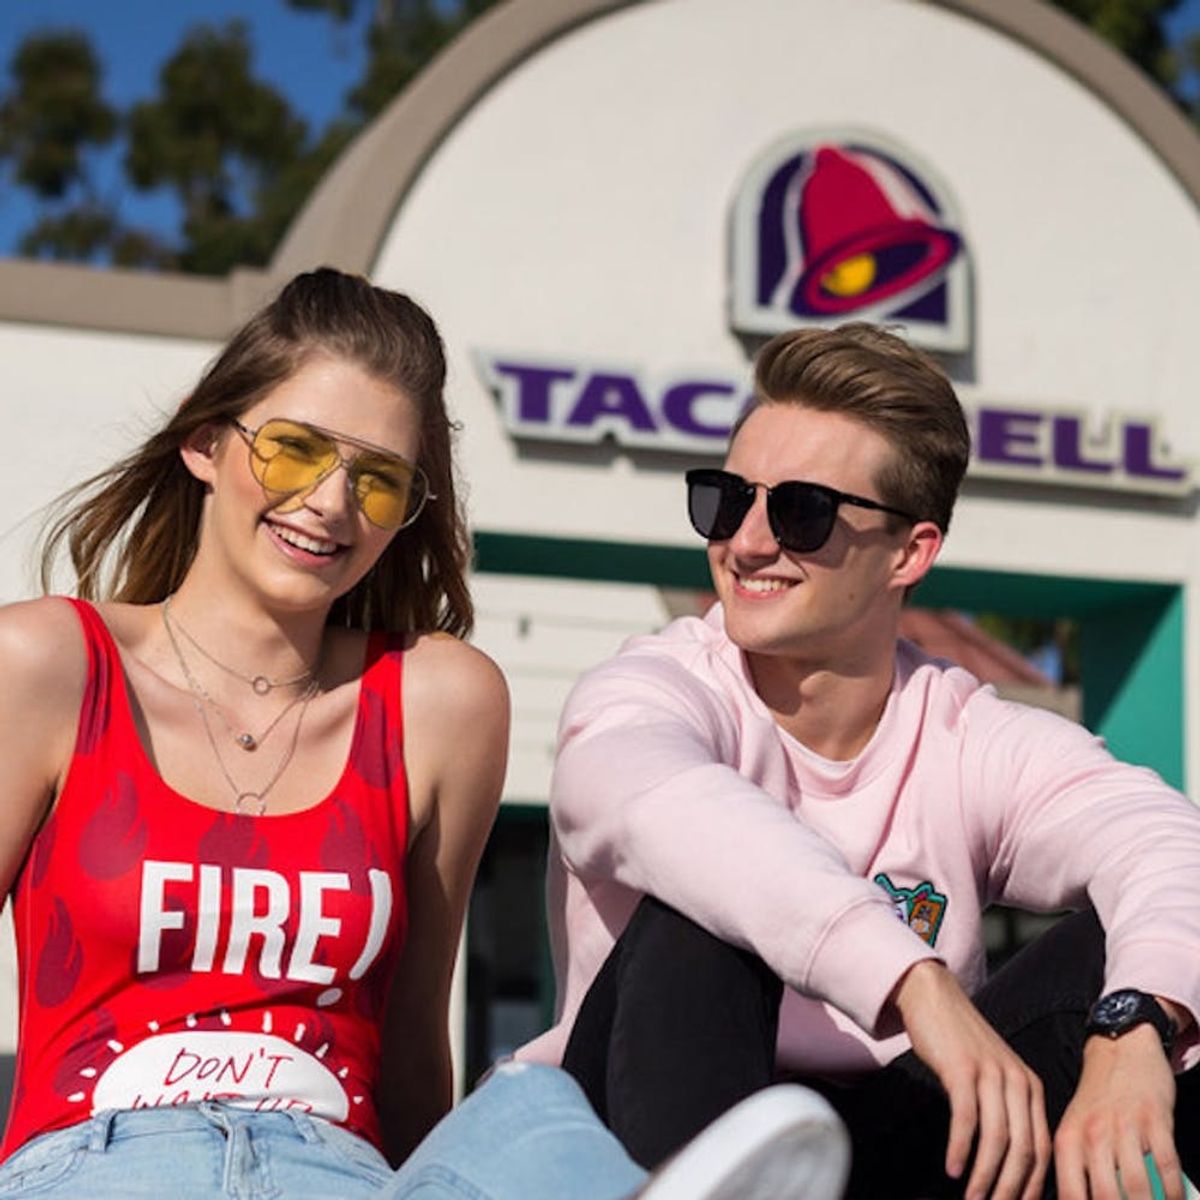 Forever 21 x Taco Bell Is the Strange, Yet Delightful Collaboration You Never Knew You Needed